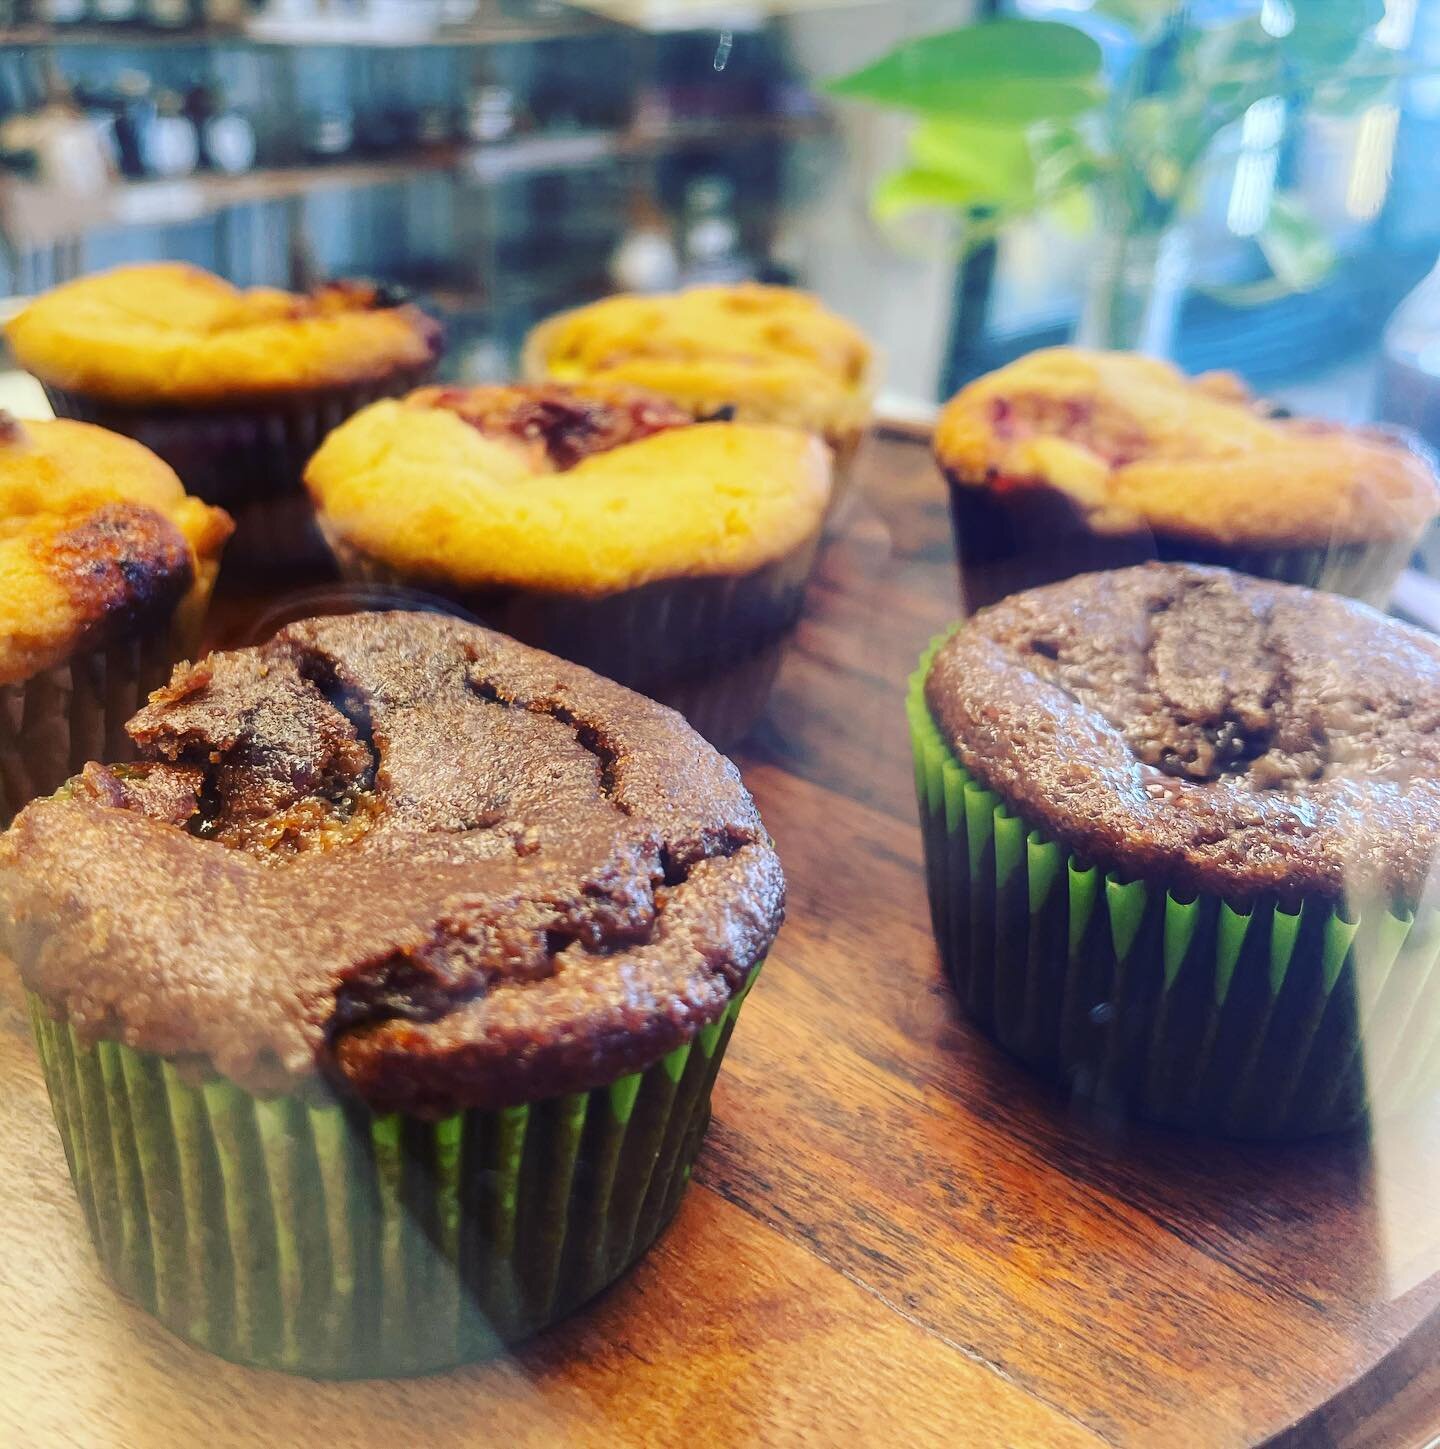 Vegan &amp; Keto Muffins available this lovely Saturday morning. Come grab one with a cafecito this morning. 

Always Organic, Grain &amp; Gluten Free. 

Organic Grain &amp; Gluten Free Bakery 
Immune System Support Caf&eacute; 
✊🏽Celiac Friendly 🤟